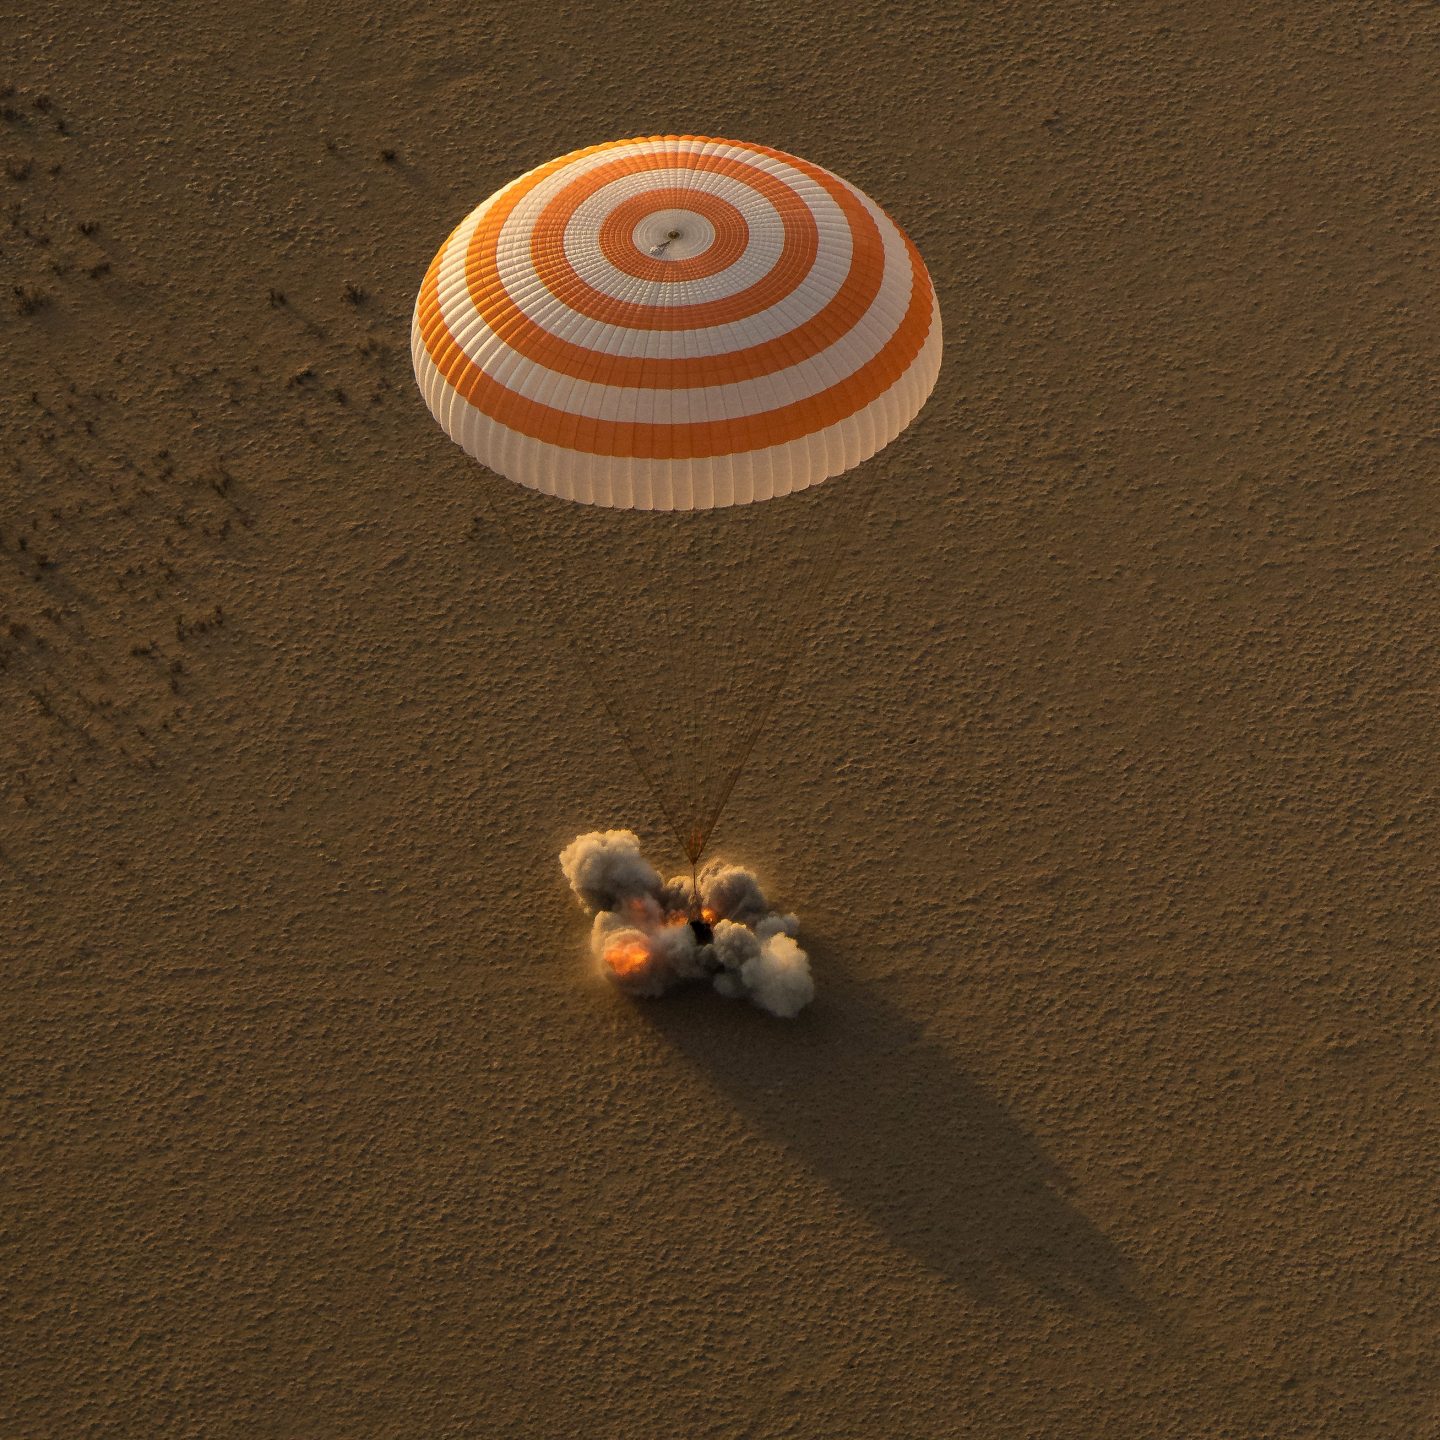 bringing astronauts home from the International Space Station.